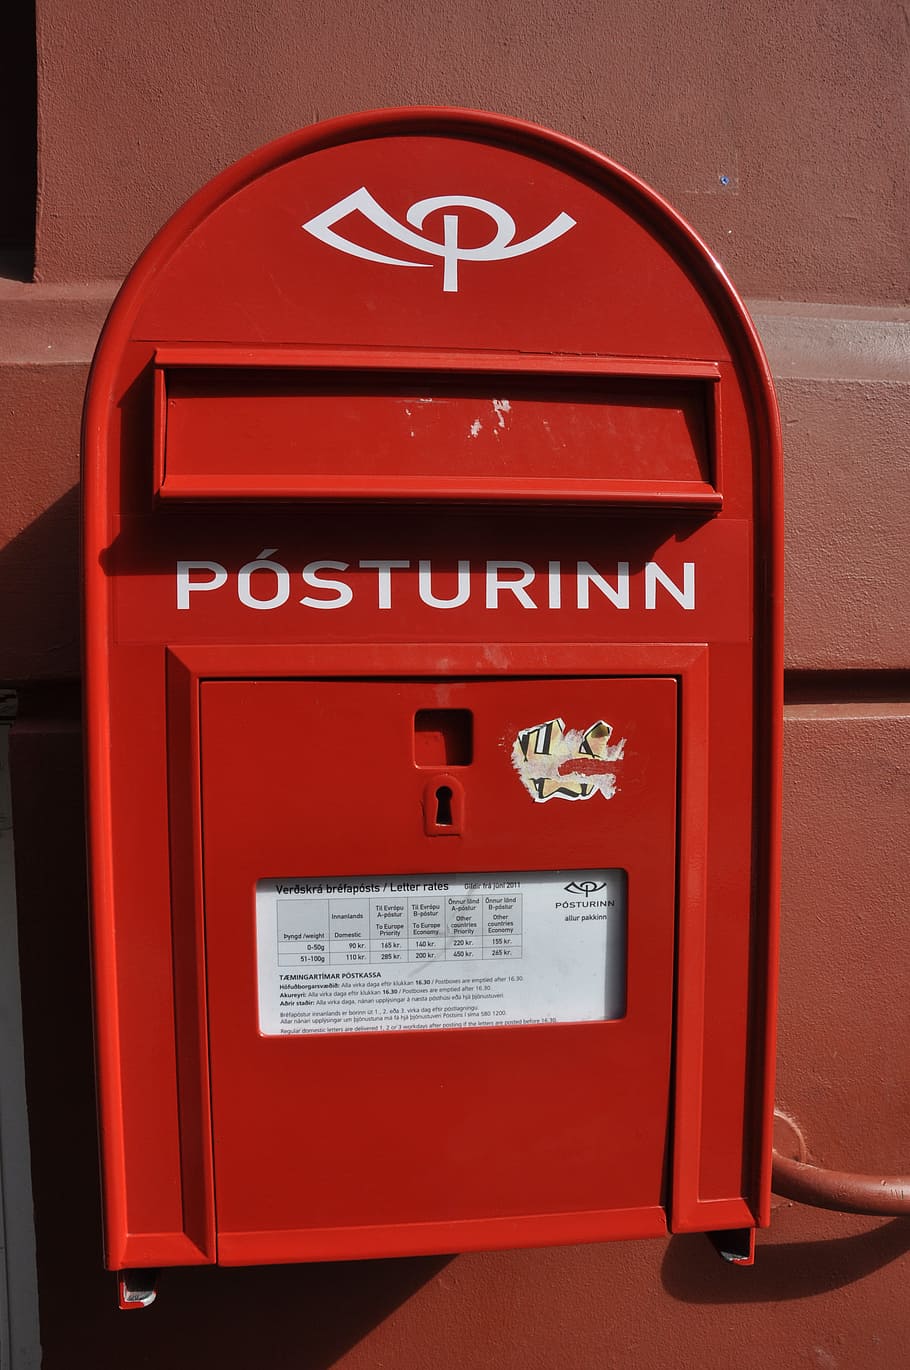 Mailbox, Post, Postal, communication, delivery, service, postbox, HD wallpaper